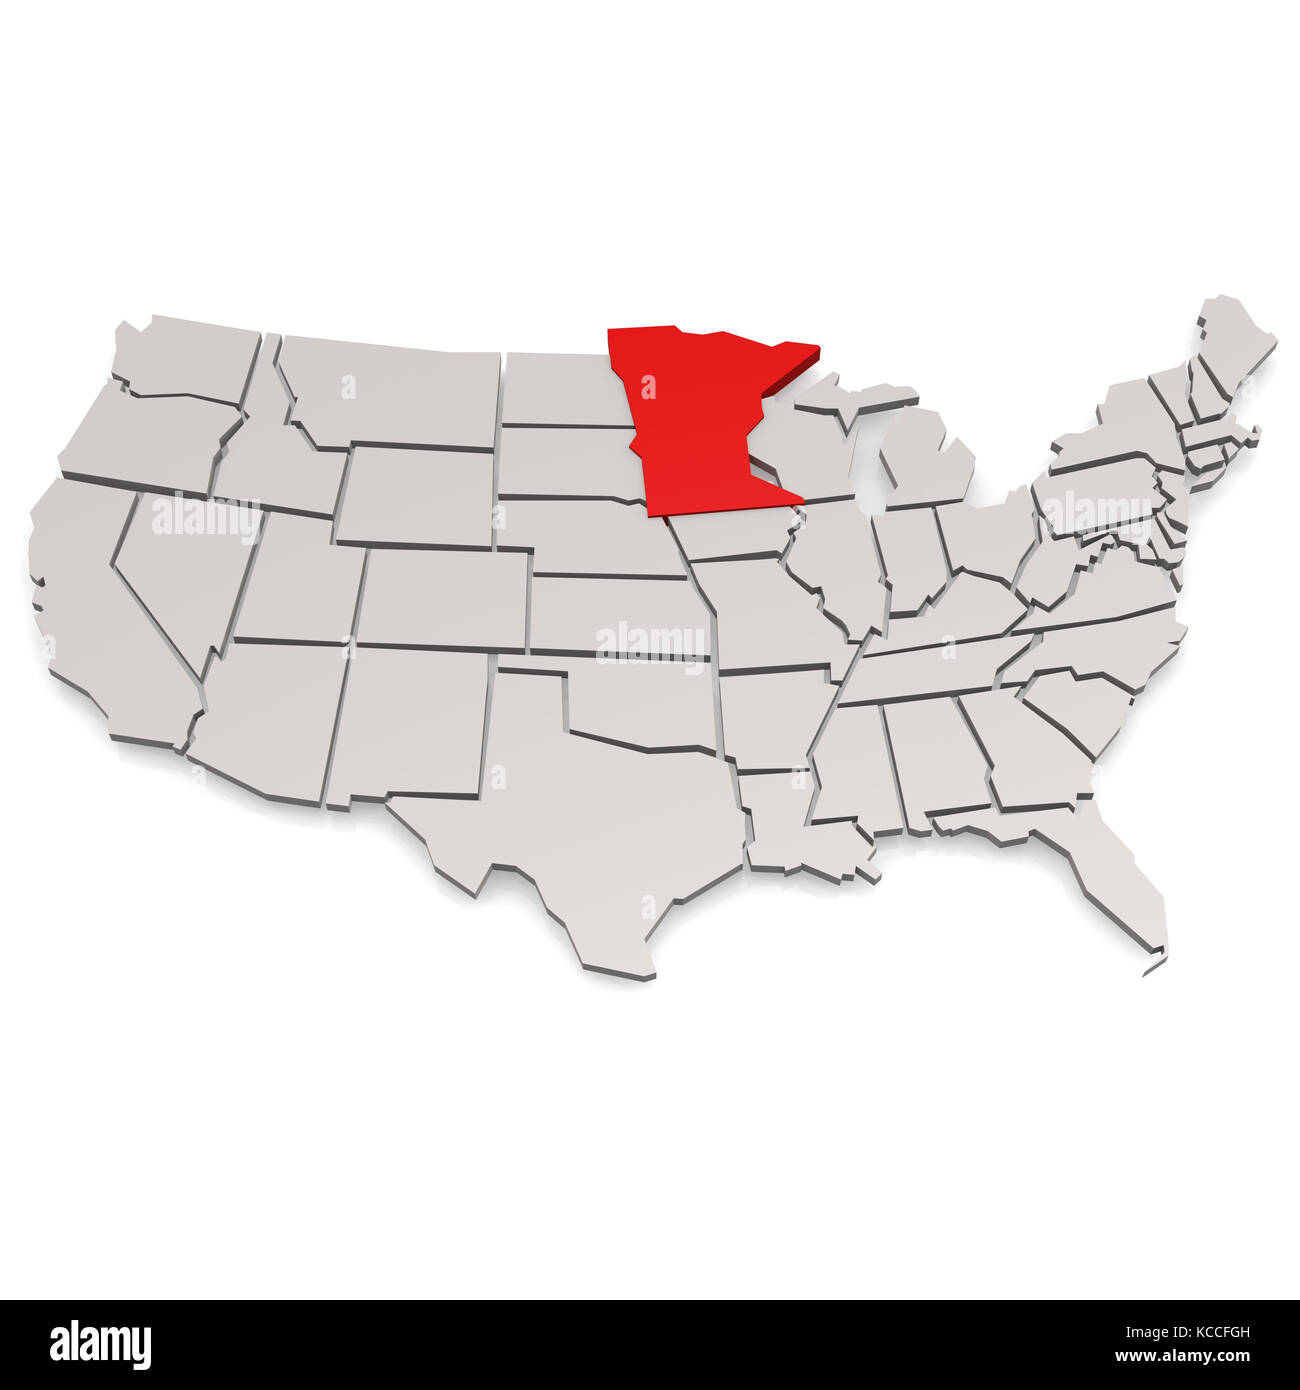 Minnesota image with hi-res rendered artwork that could be used for any graphic design. Stock Photo